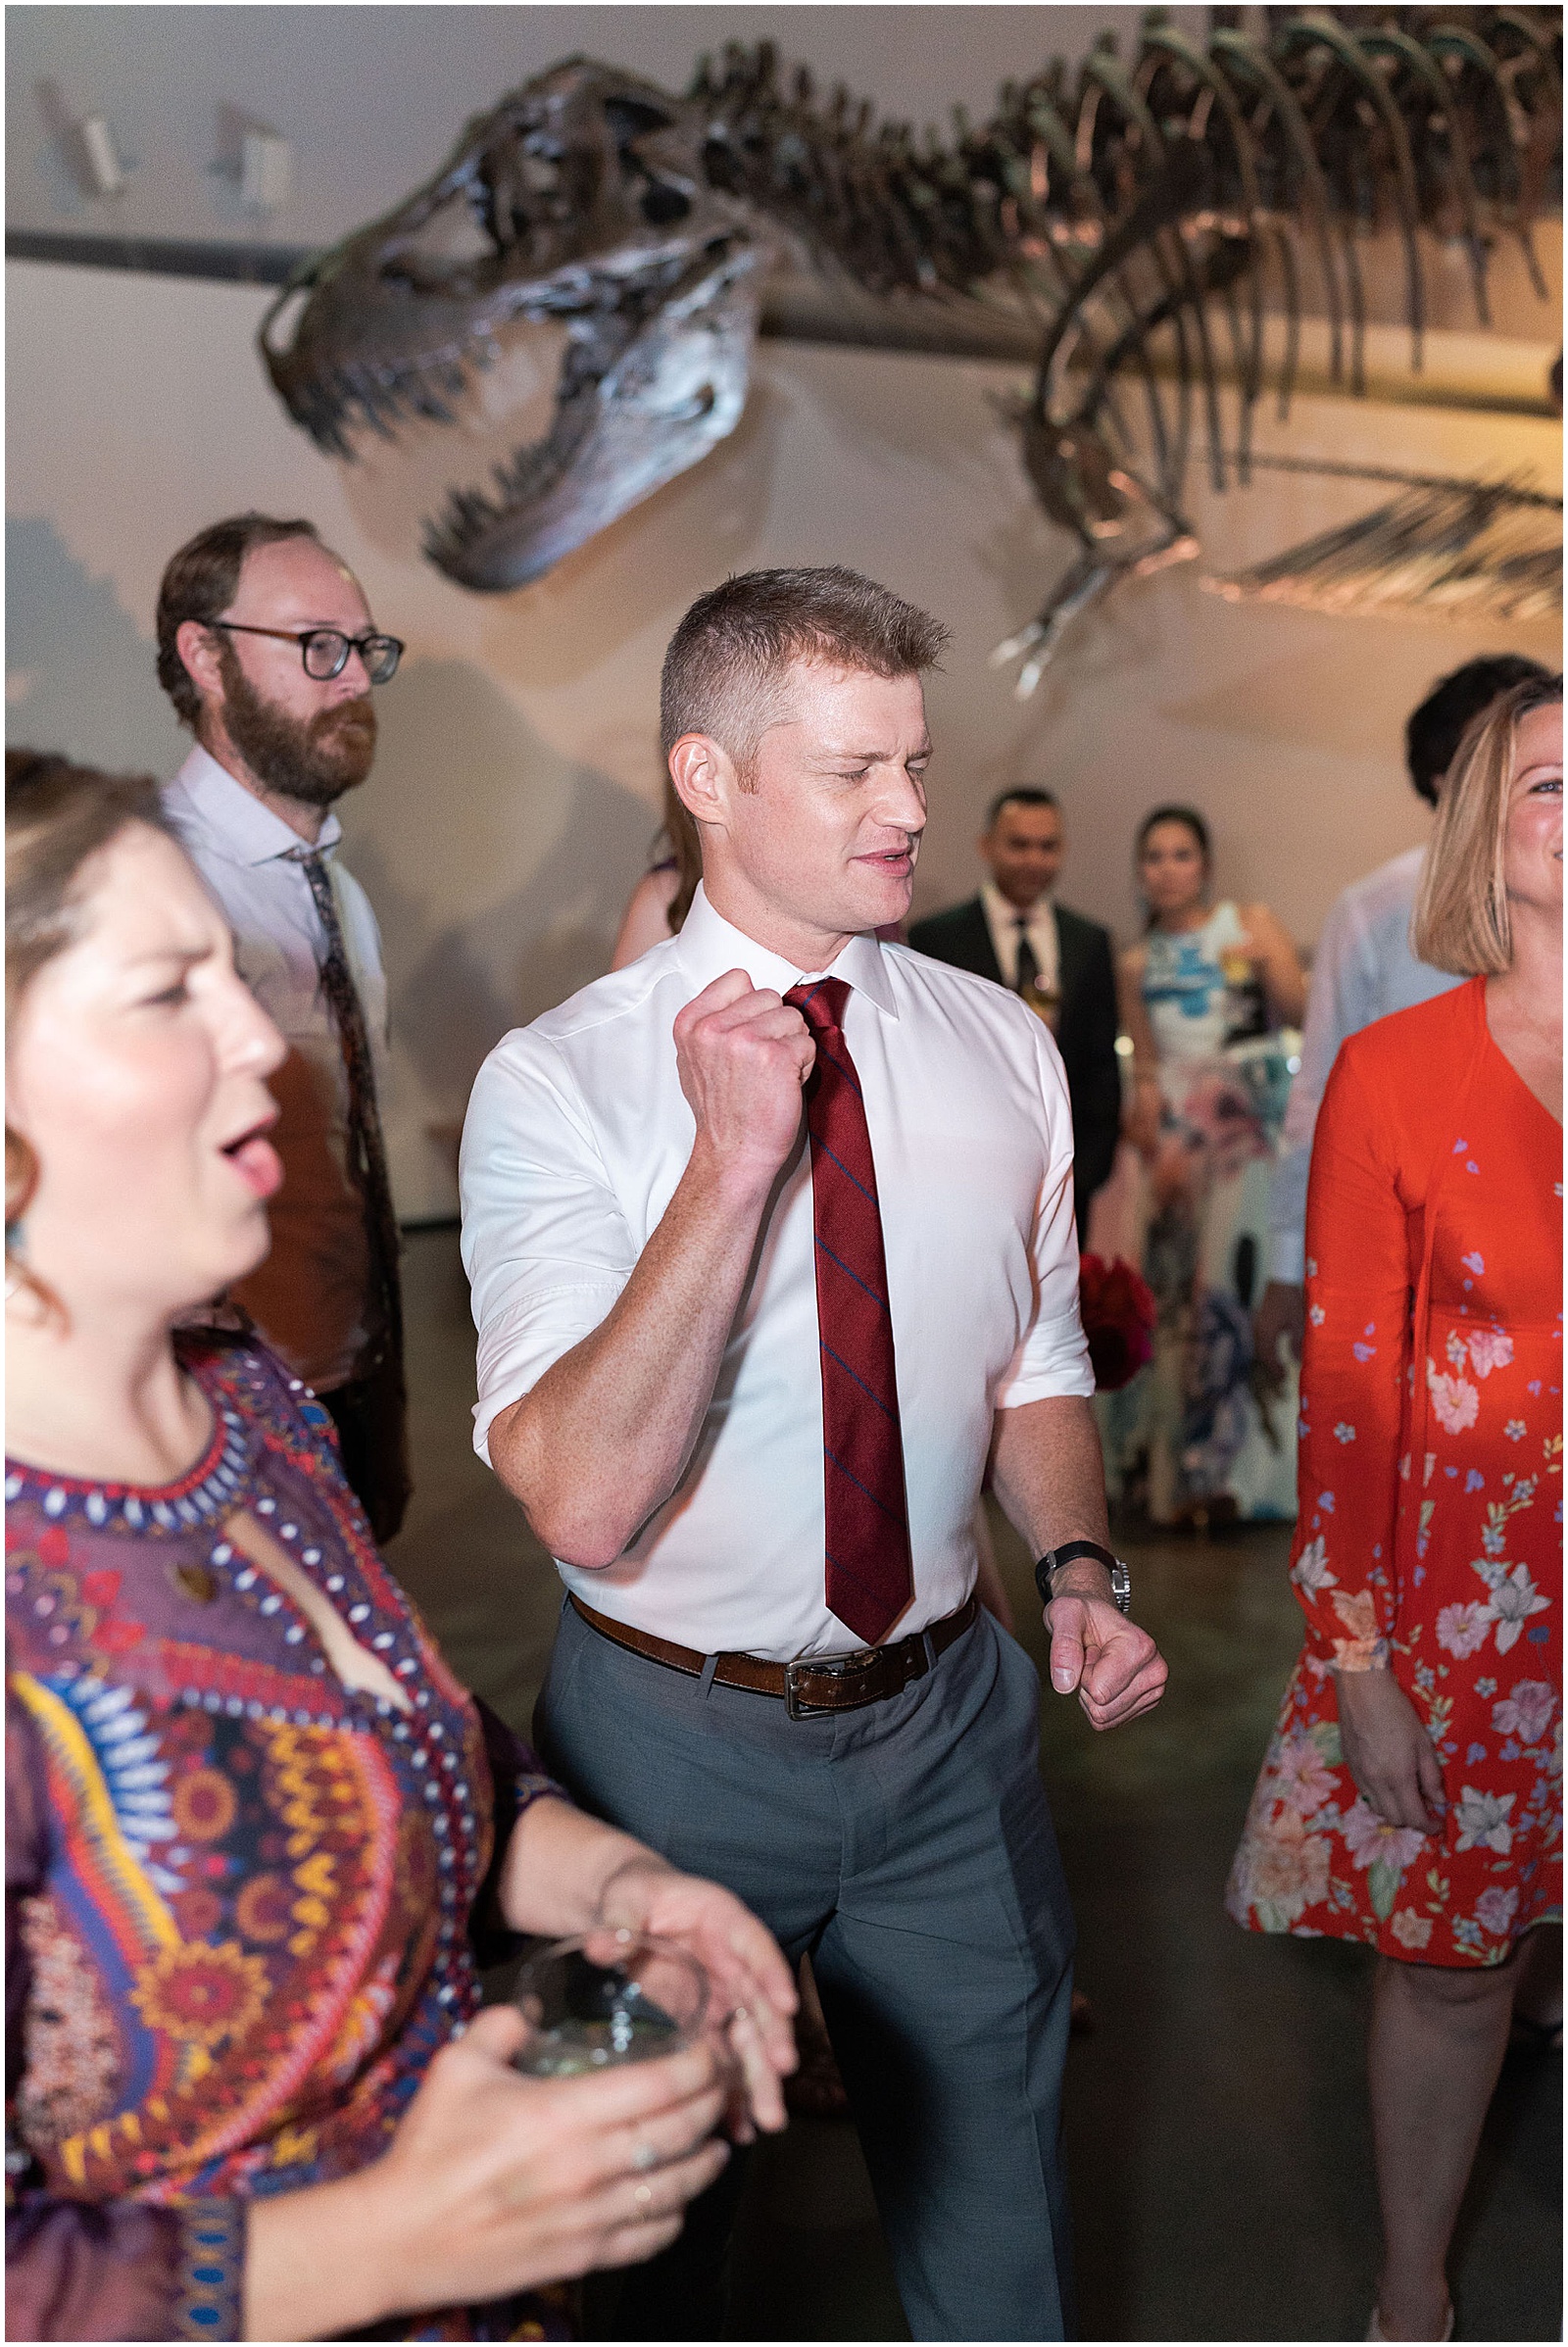 Dancing with Dinosaurs at Houston Museum of Natural Science Wedding Reception | Swish and Click Photography